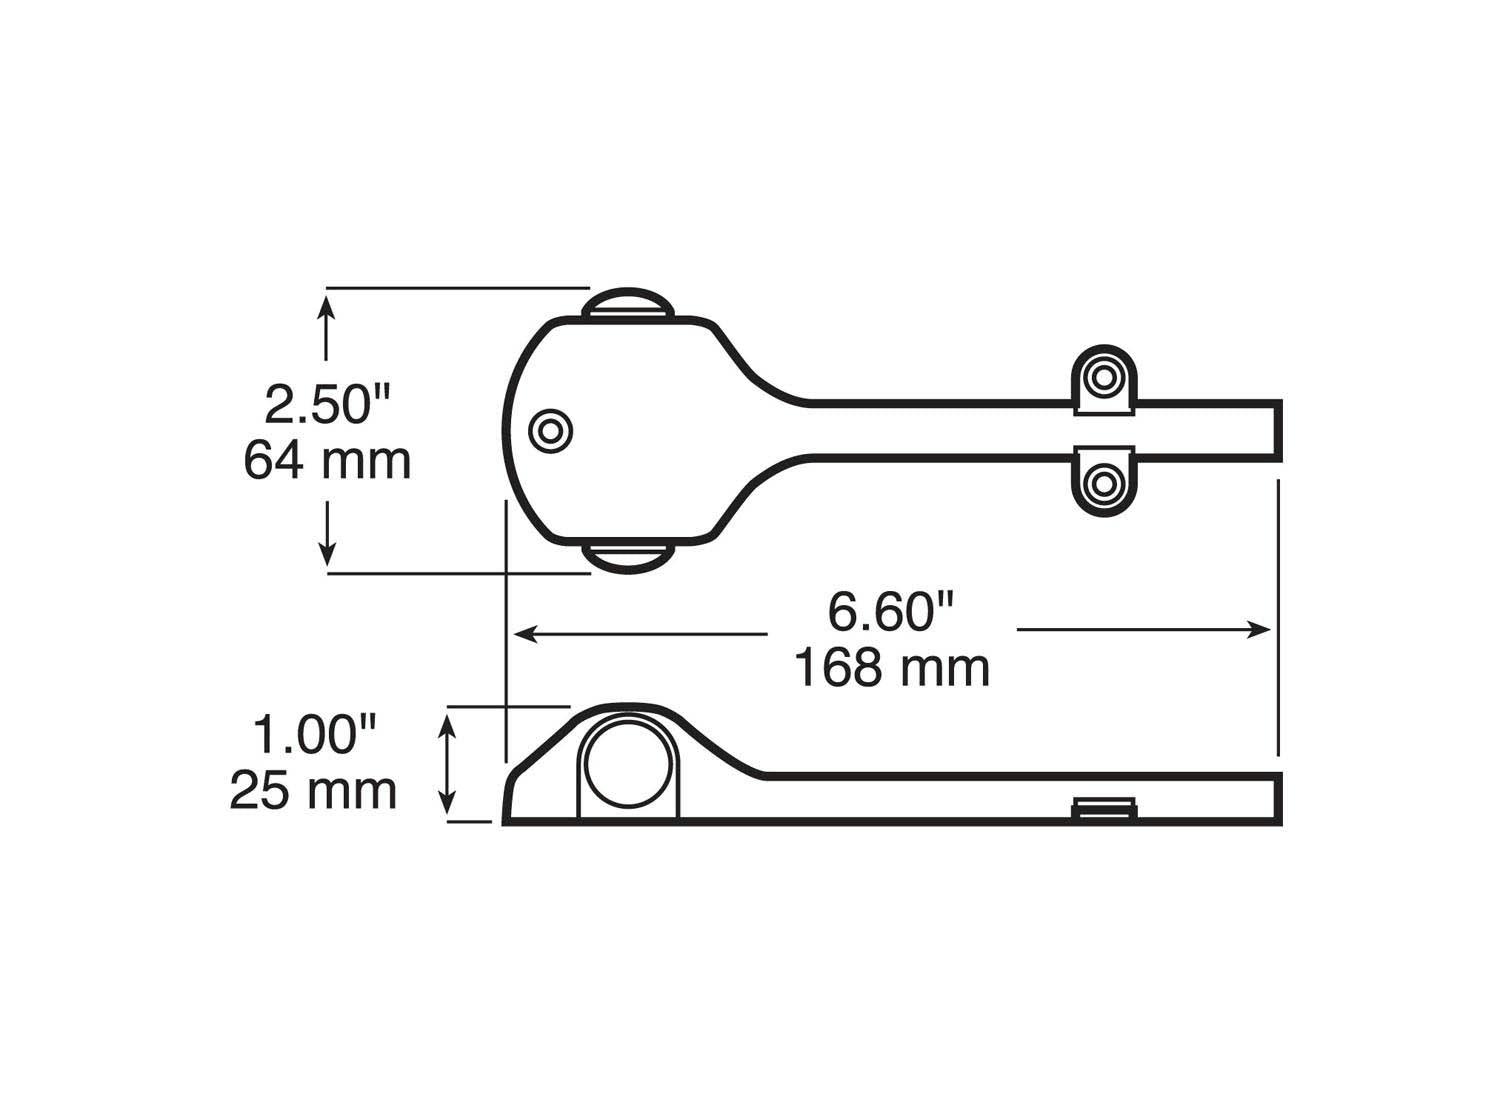 LED Marker/ Clearance, P2, Round, Fender Mount Kit, Road, 0.75", red + amber, bulk pack (Pack of 100) - 277K_line_dual_2view-BX5_f372b619-84a6-4d51-92ab-f80439eddfd6